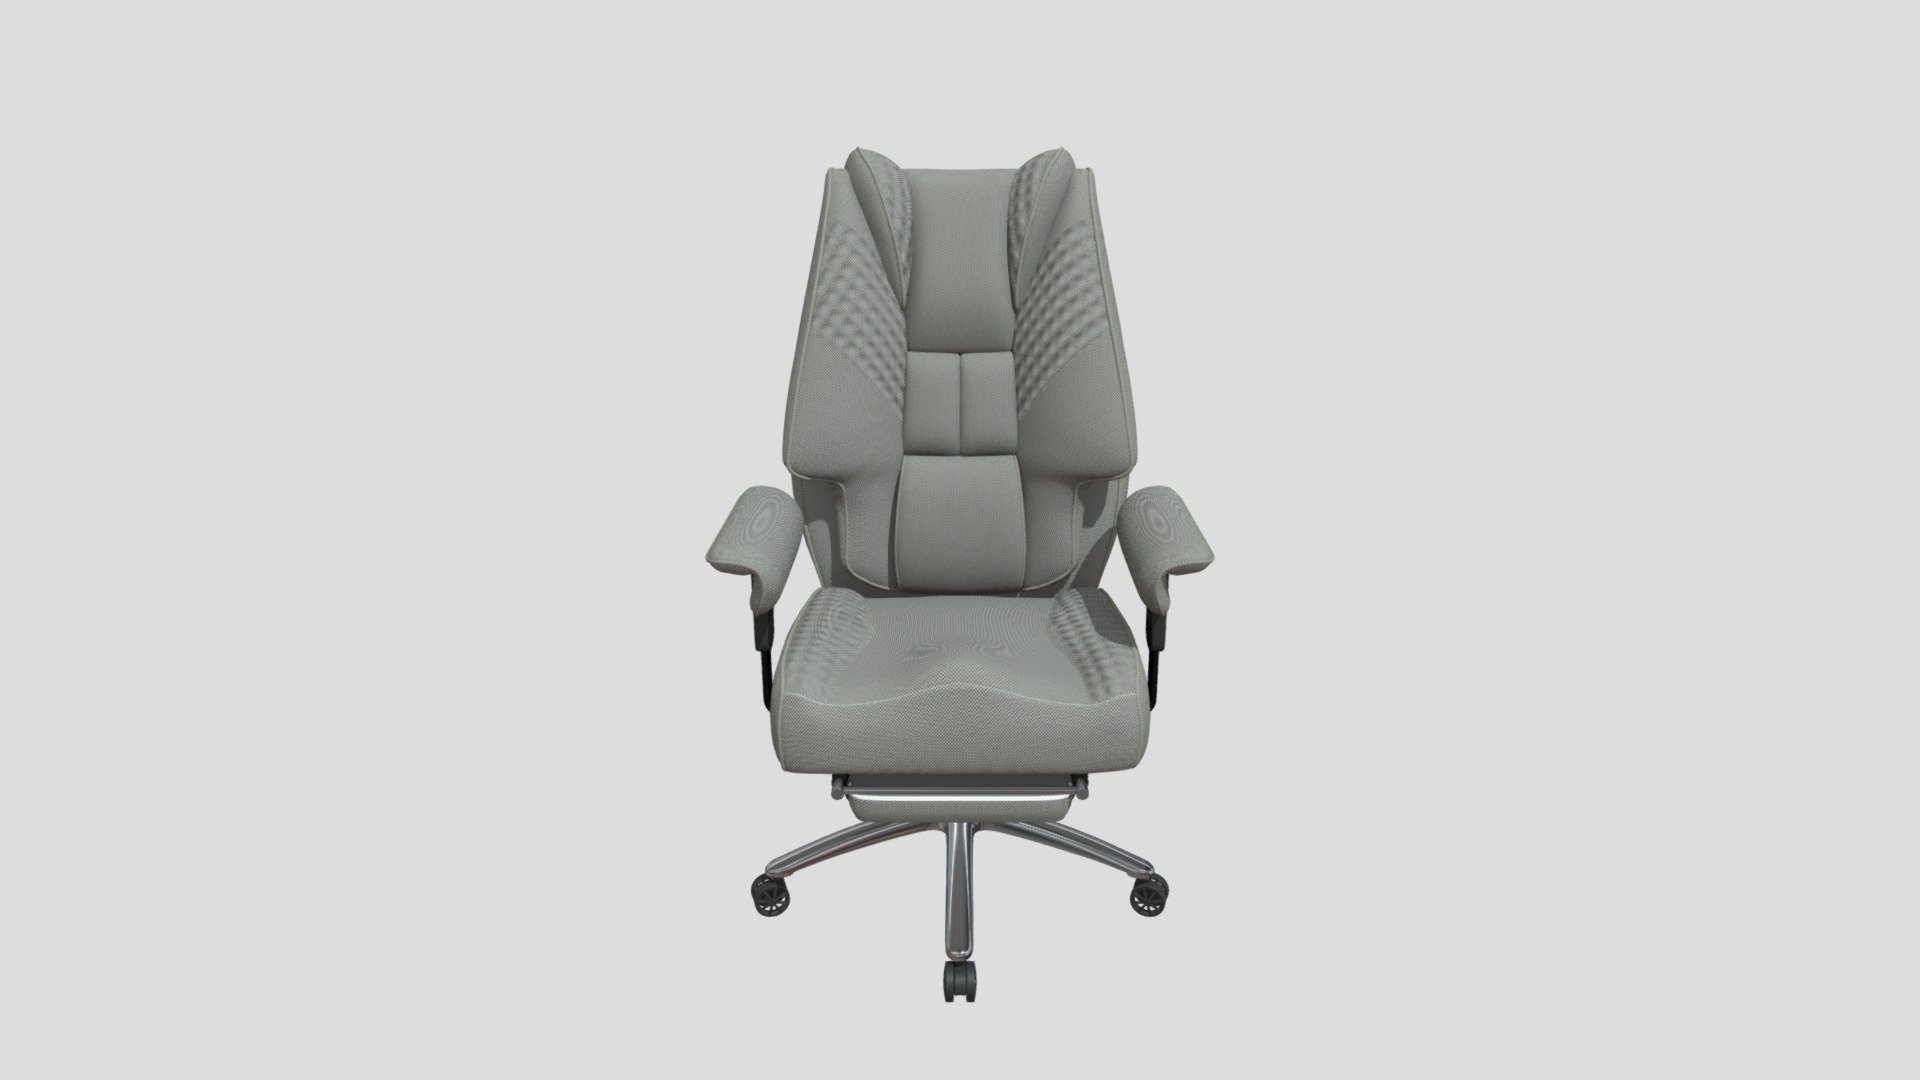 Big and Tall Office Chair come with double-layer high-density sponge backrest and partitioned wrapping design offers an excellent lumbar and neck support for those long working hours.

Excutive Office chair with expanded nest-shaped armrest ,extra soft padded and widened spring seat cushion, gives an essence of leisure.

Office Chair with retractable footrest and 360 degree with 100000 rolling swivel wheels for extra comfortable.

Adjustable Back Angle from 90°-180° as you wish and it can be locked at any angle.

Max Weight 400 LBS (Recommended weight 175-300 pounds), Fit for 5&lsquo;11